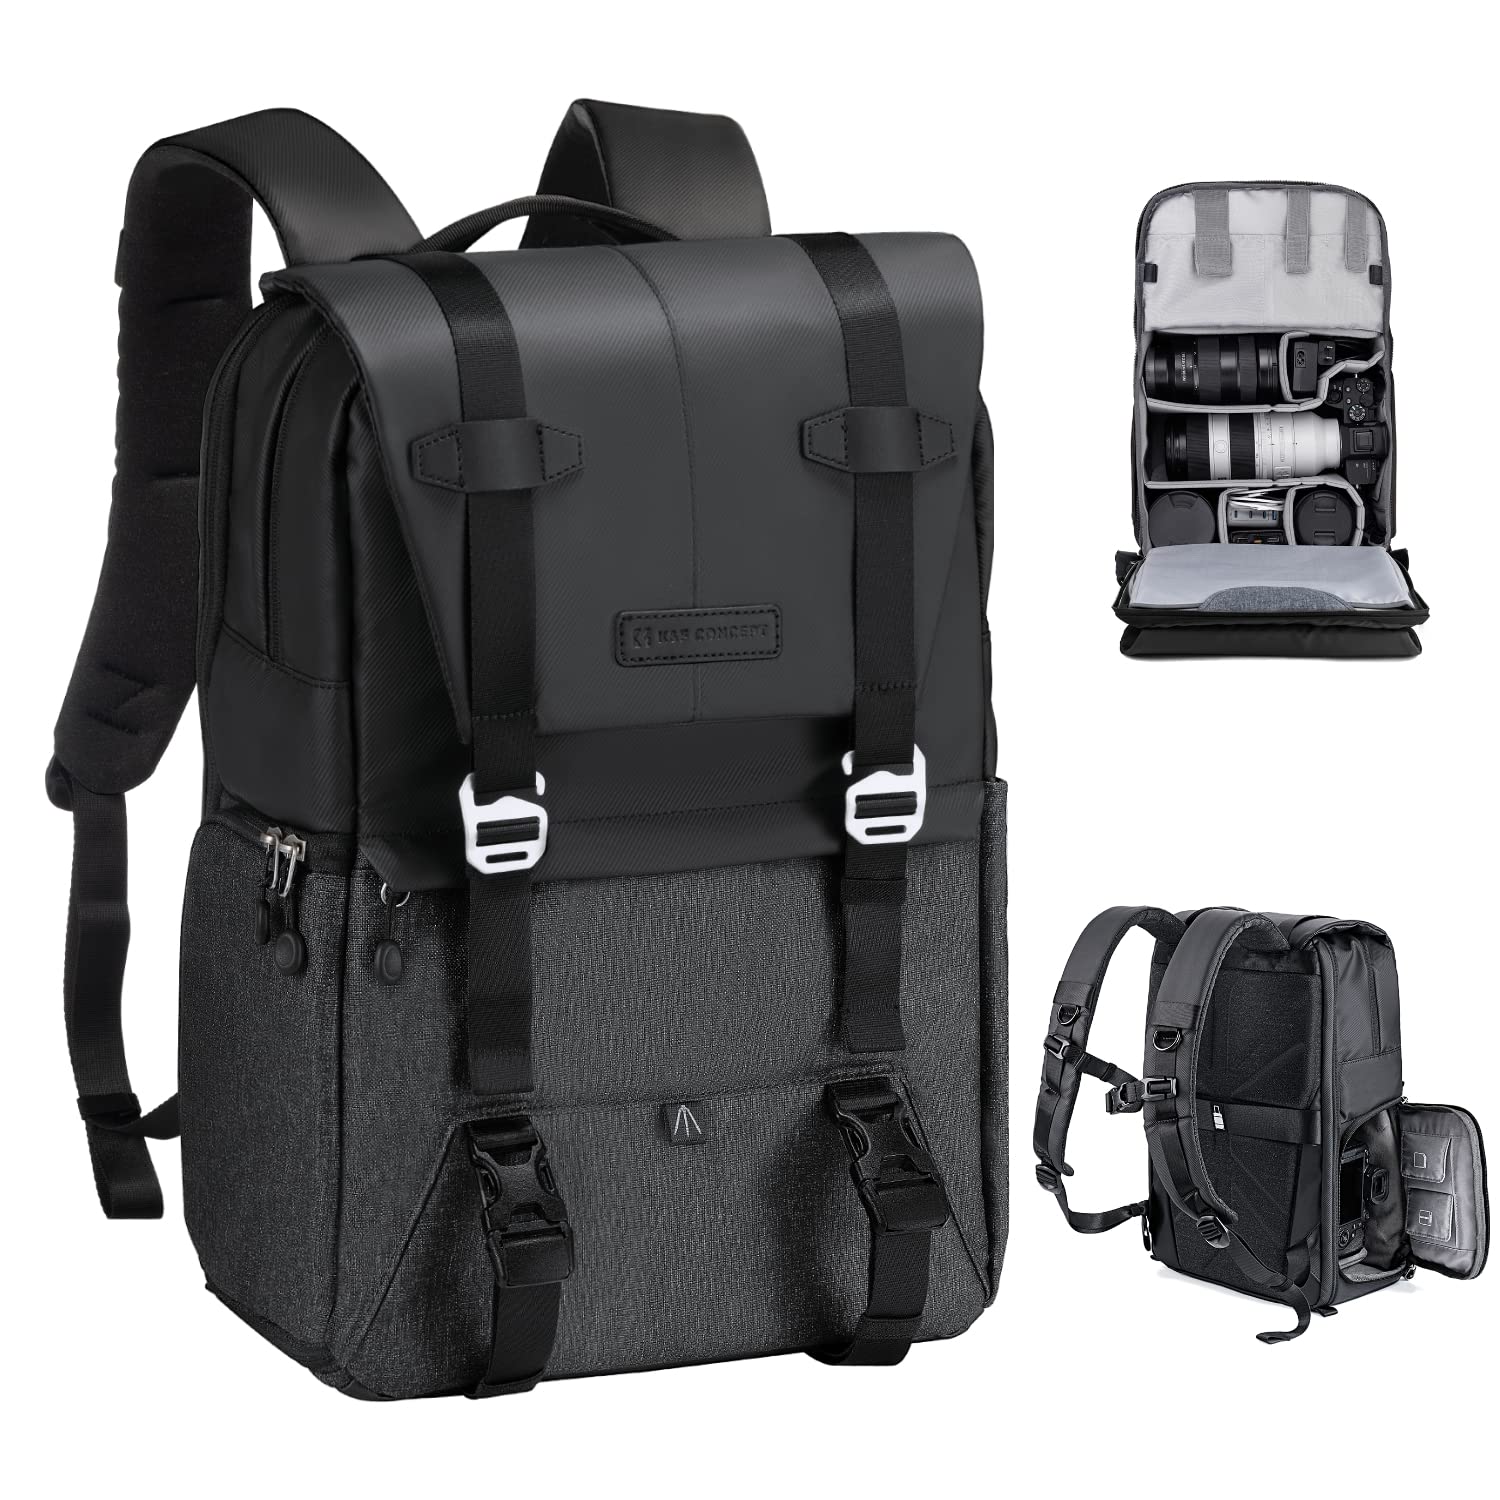 K&F Concept Camera Backpack, Camera Bags for Photographers Dslr Cameras Compatible for Canon Nikon Sony DJI Mavic Drone, 20L Large Capacity Bag Cover 15.6 Inch Laptop Camera Cases with Raincover